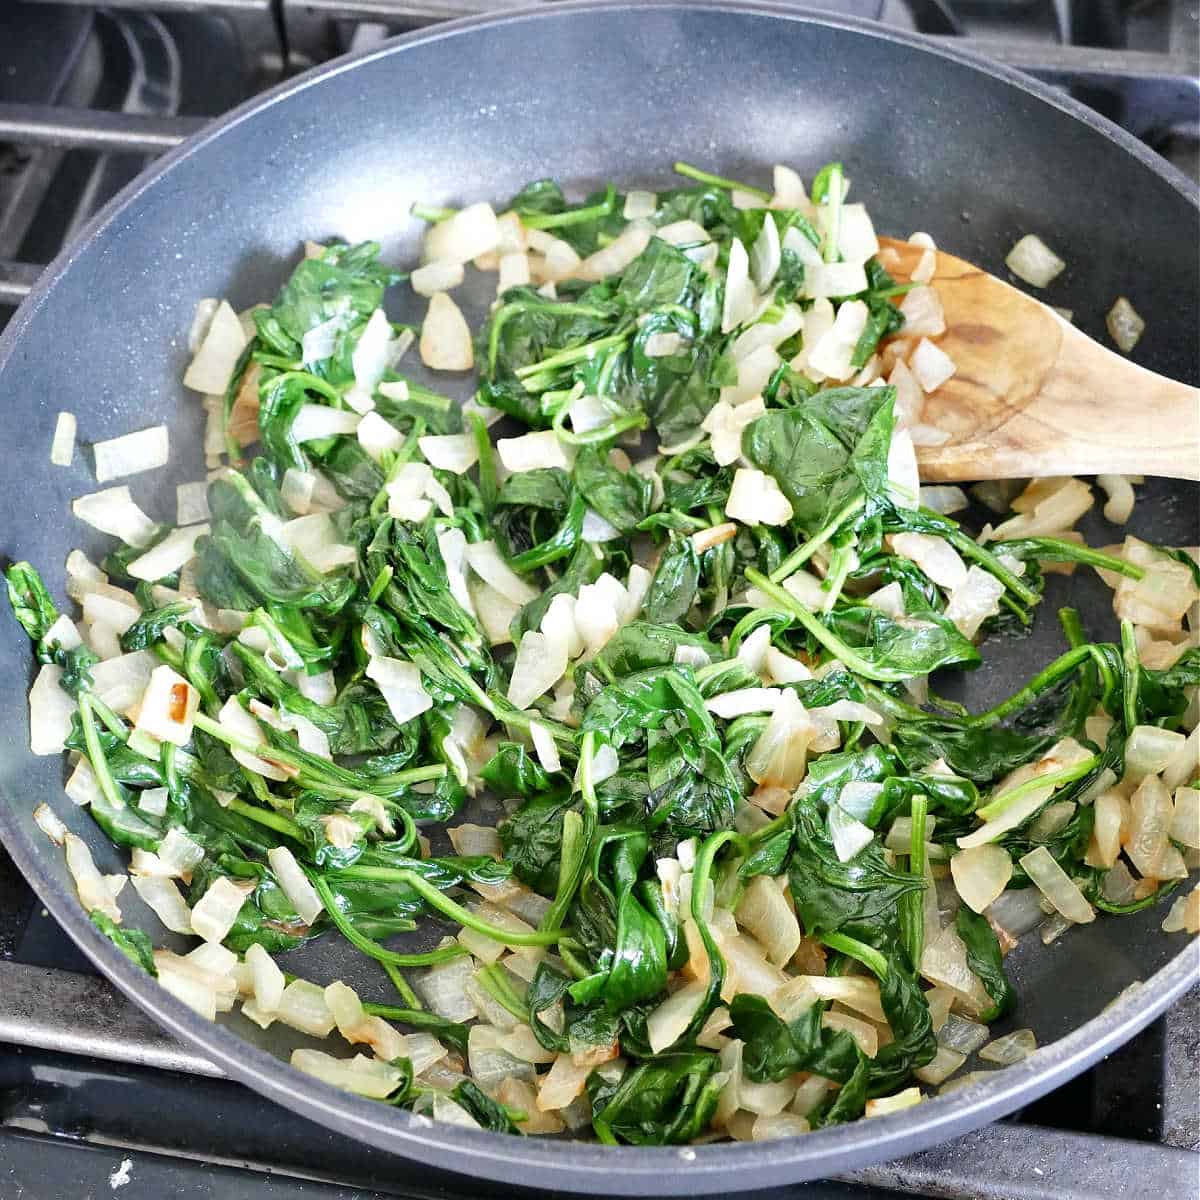 Cooking the spinach and onions in a skillet.